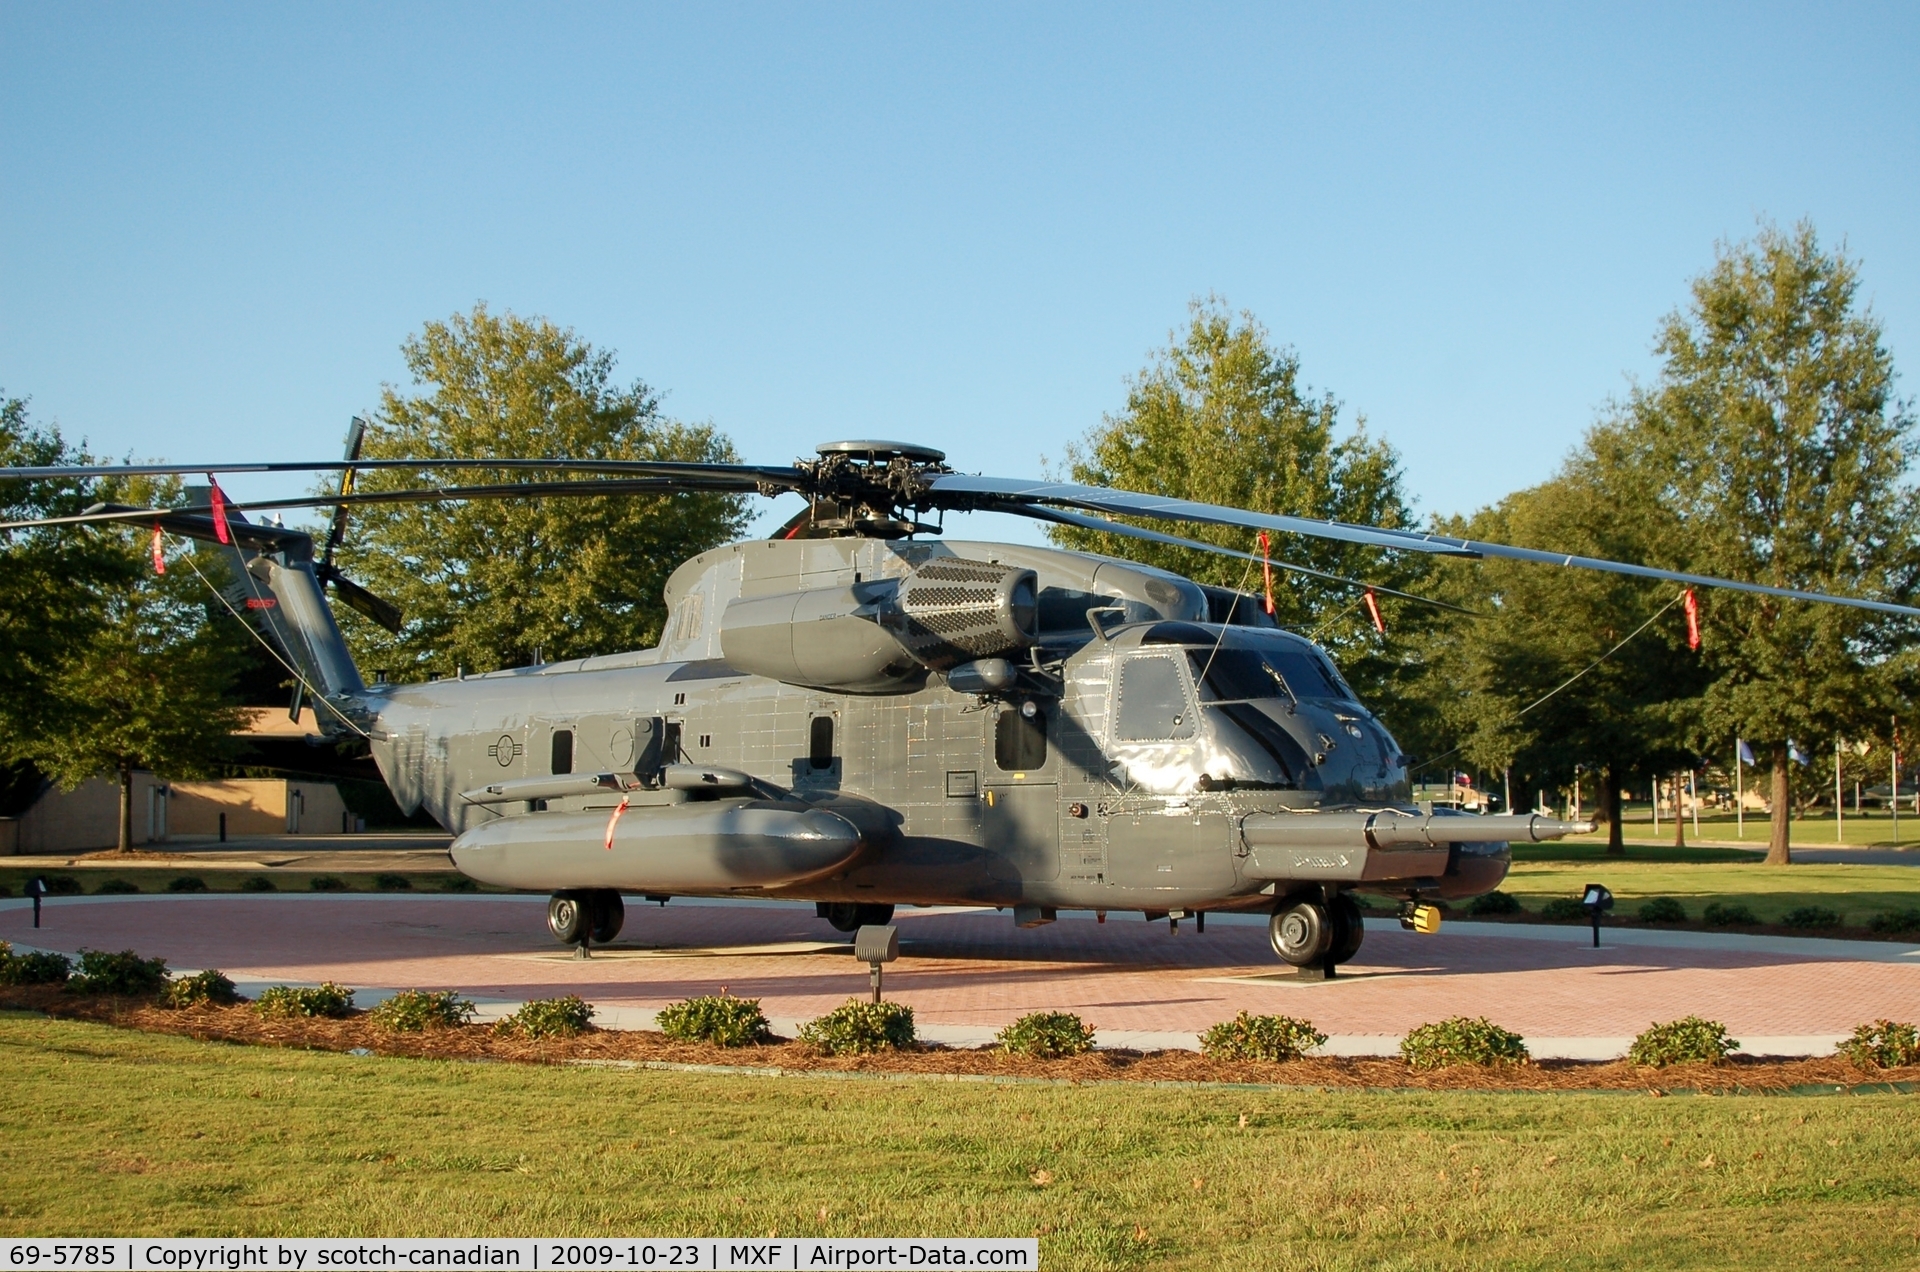 69-5785, 1969 Sikorsky MH-53M Pave Low IV C/N 65-240, 1969 Sikorsky HH-53C Super Jolly Green Giant Helicopter on display at Maxwell AFB, Montgomery, AL Helicopter on display at Maxwell AFB, Montgomery, AL